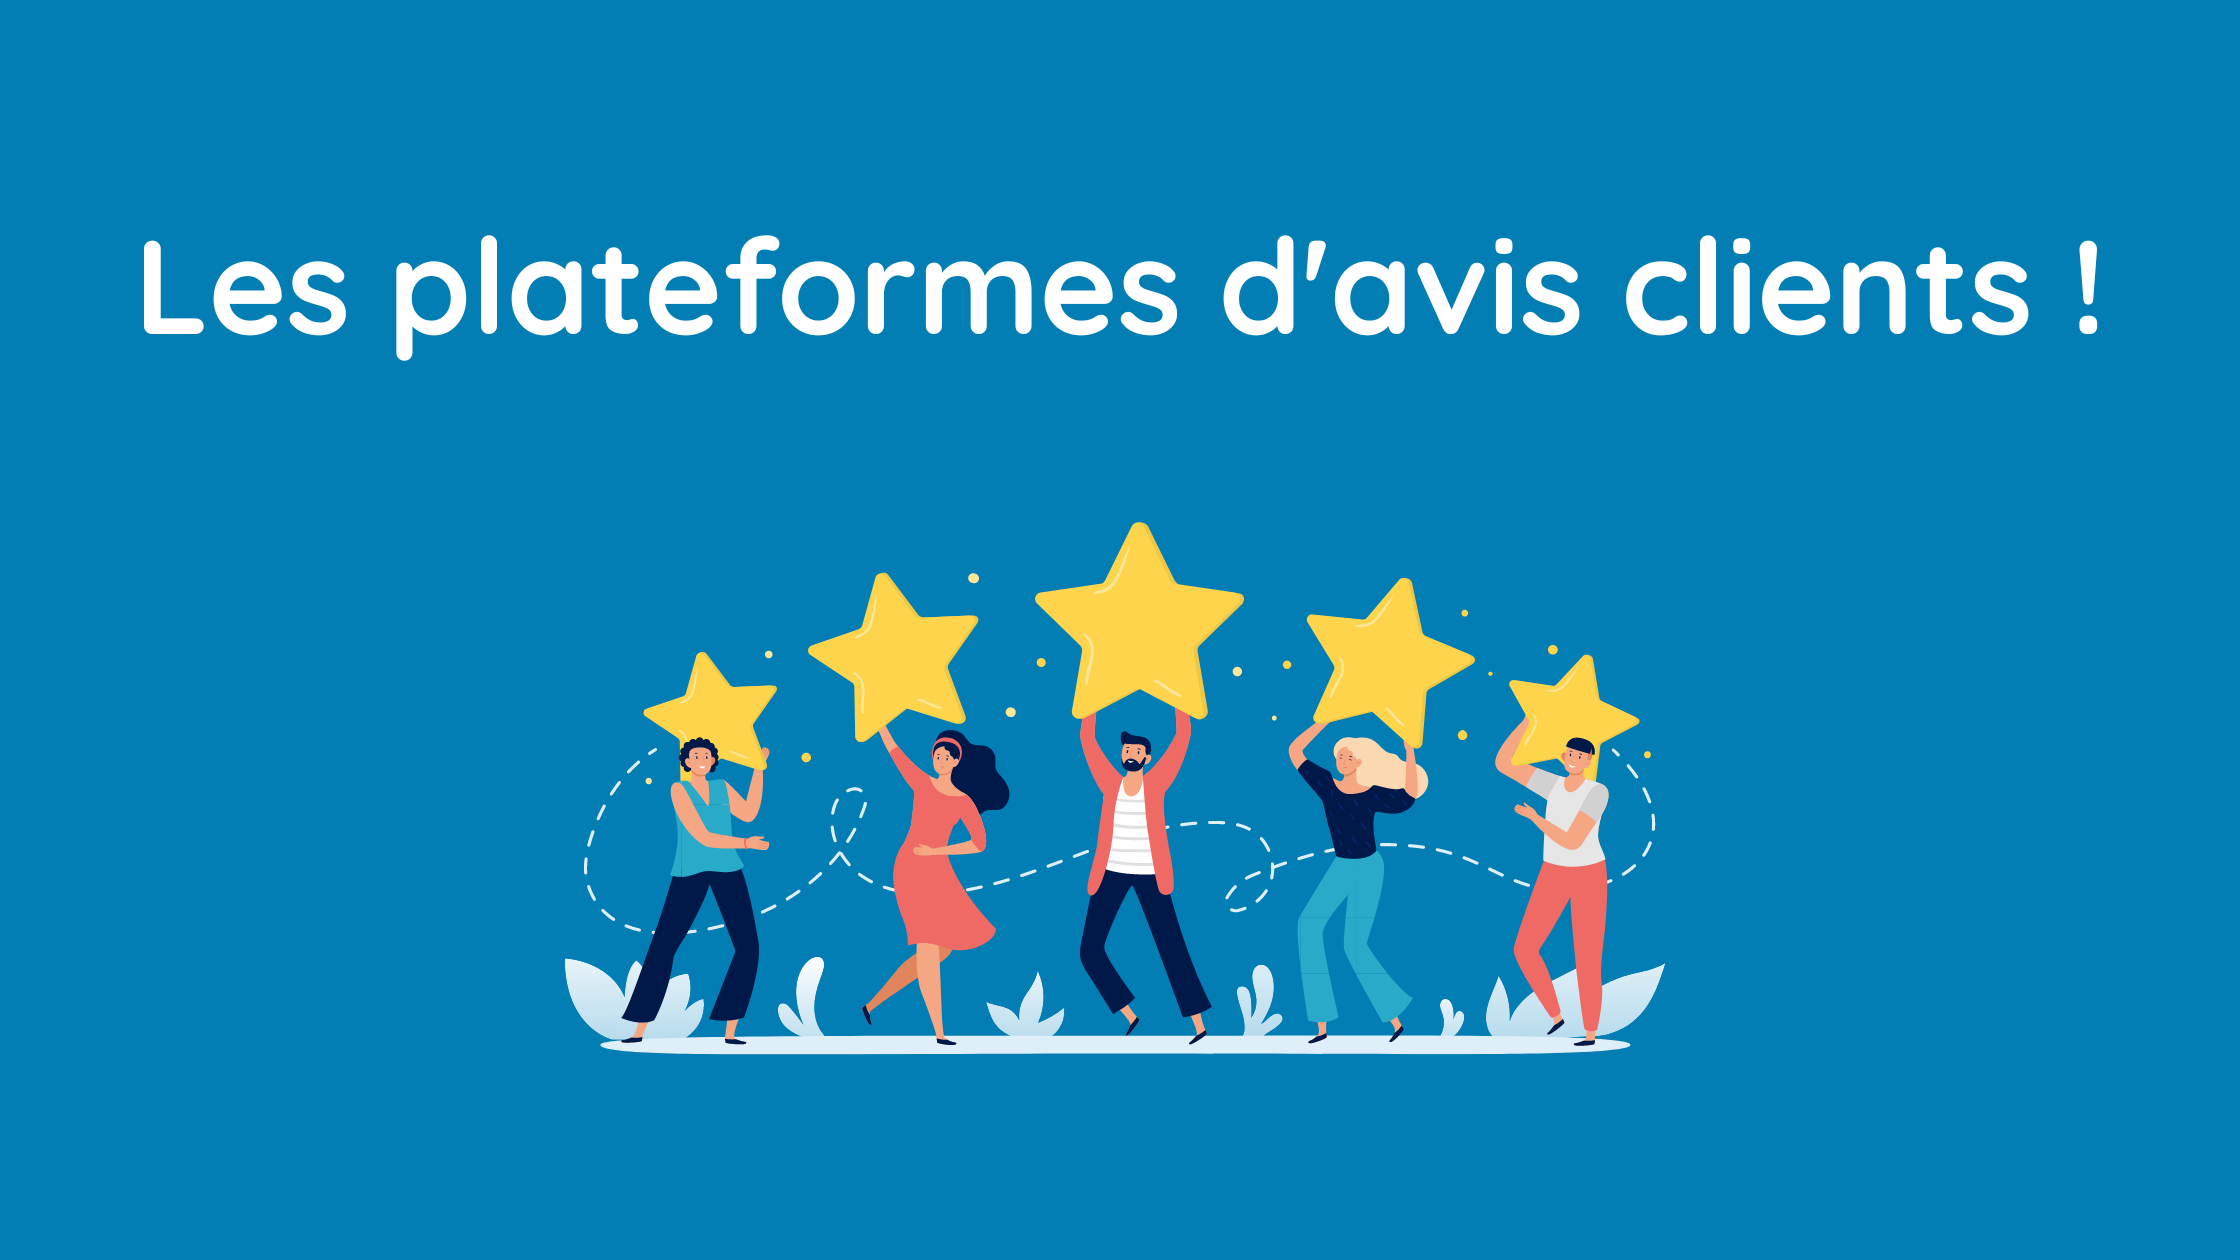 You are currently viewing Les plateformes d’avis clients !